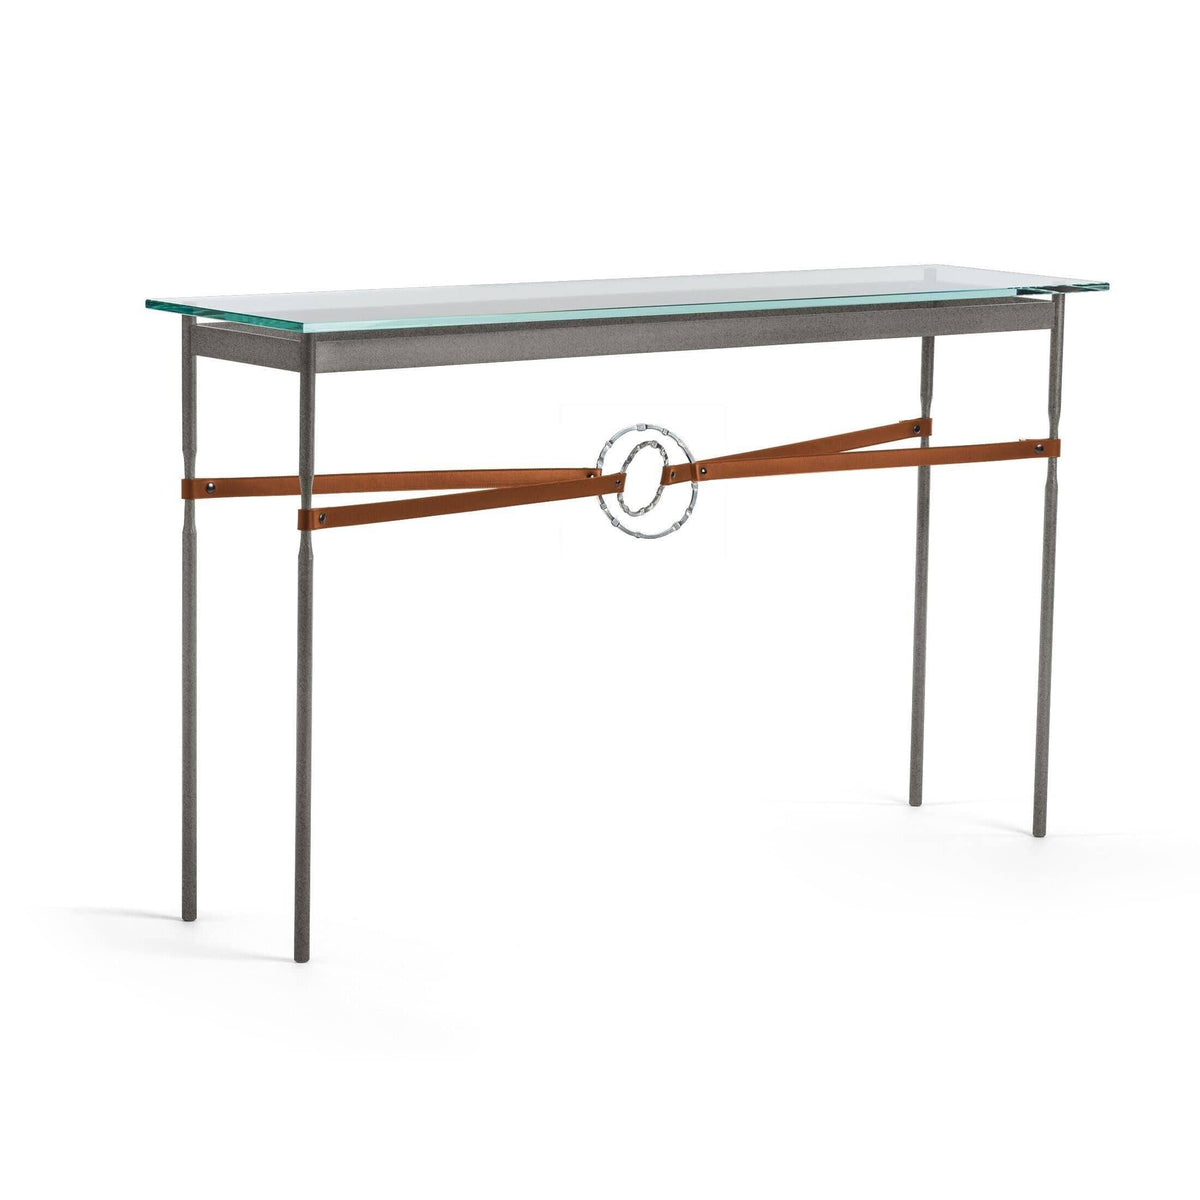 Hubbardton Forge - Equus Chestnut Leather Console Table - 750118-20-85-LC-VA0714 | Montreal Lighting & Hardware